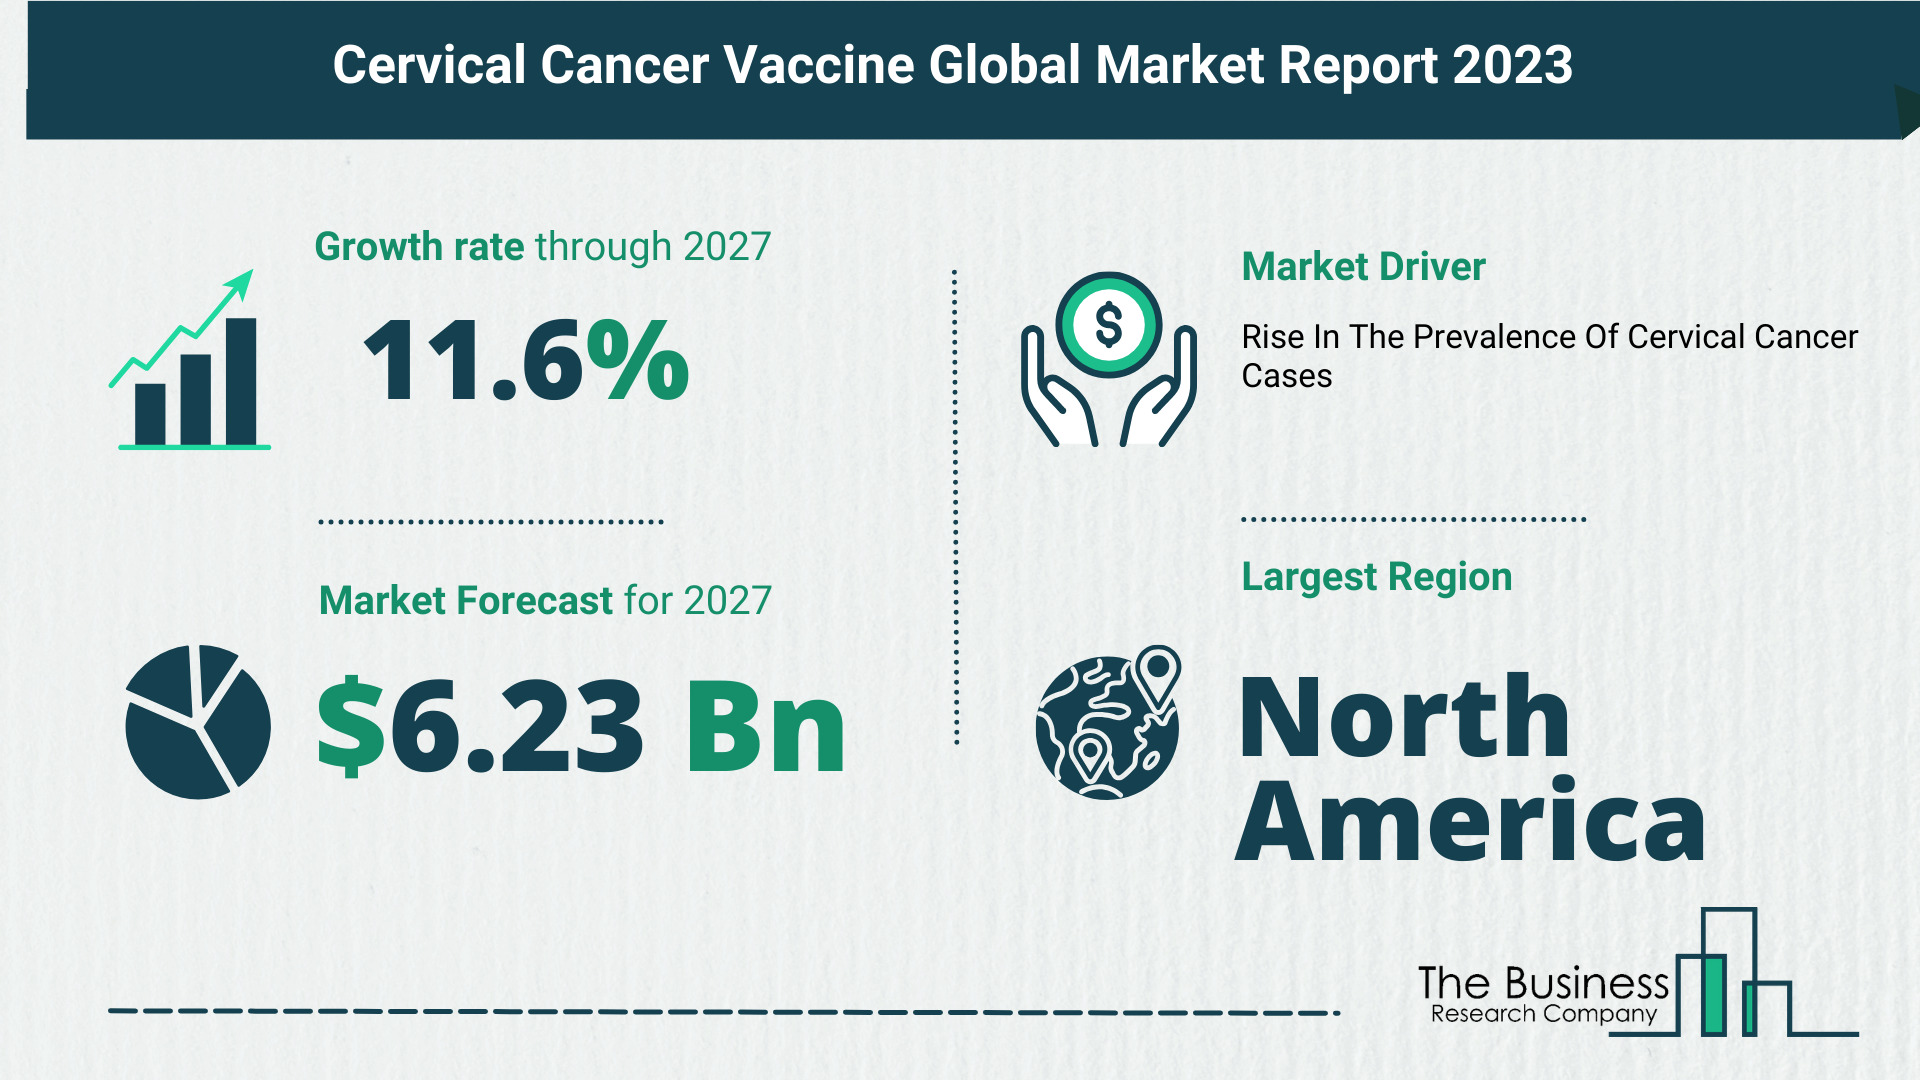 Global Cervical Cancer Vaccine Market Analysis: Estimated Market Size And Growth Rate